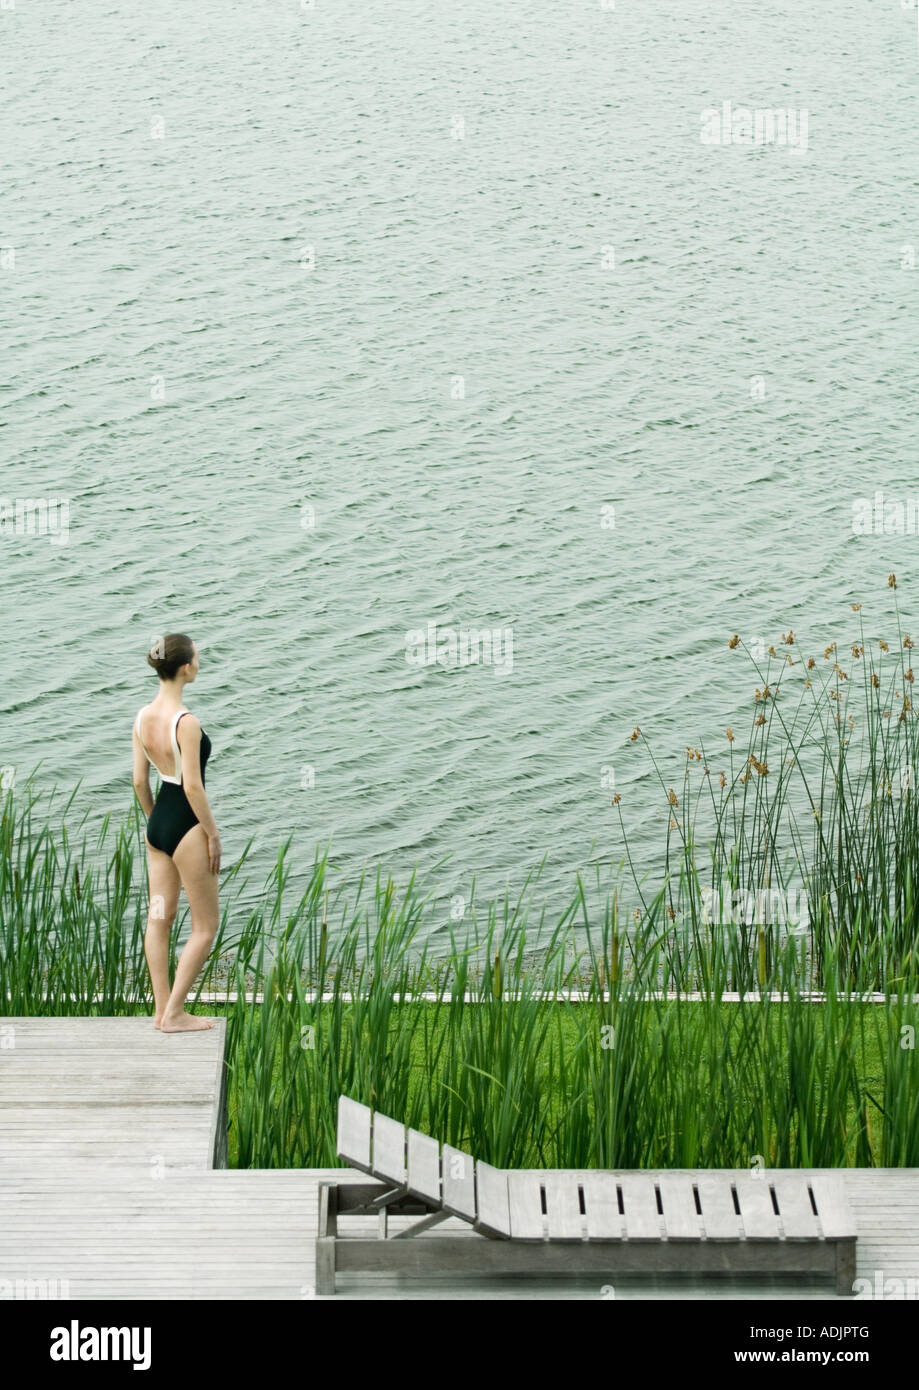 Woman in swimsuit standing on deck, looking towards body of water Stock Photo